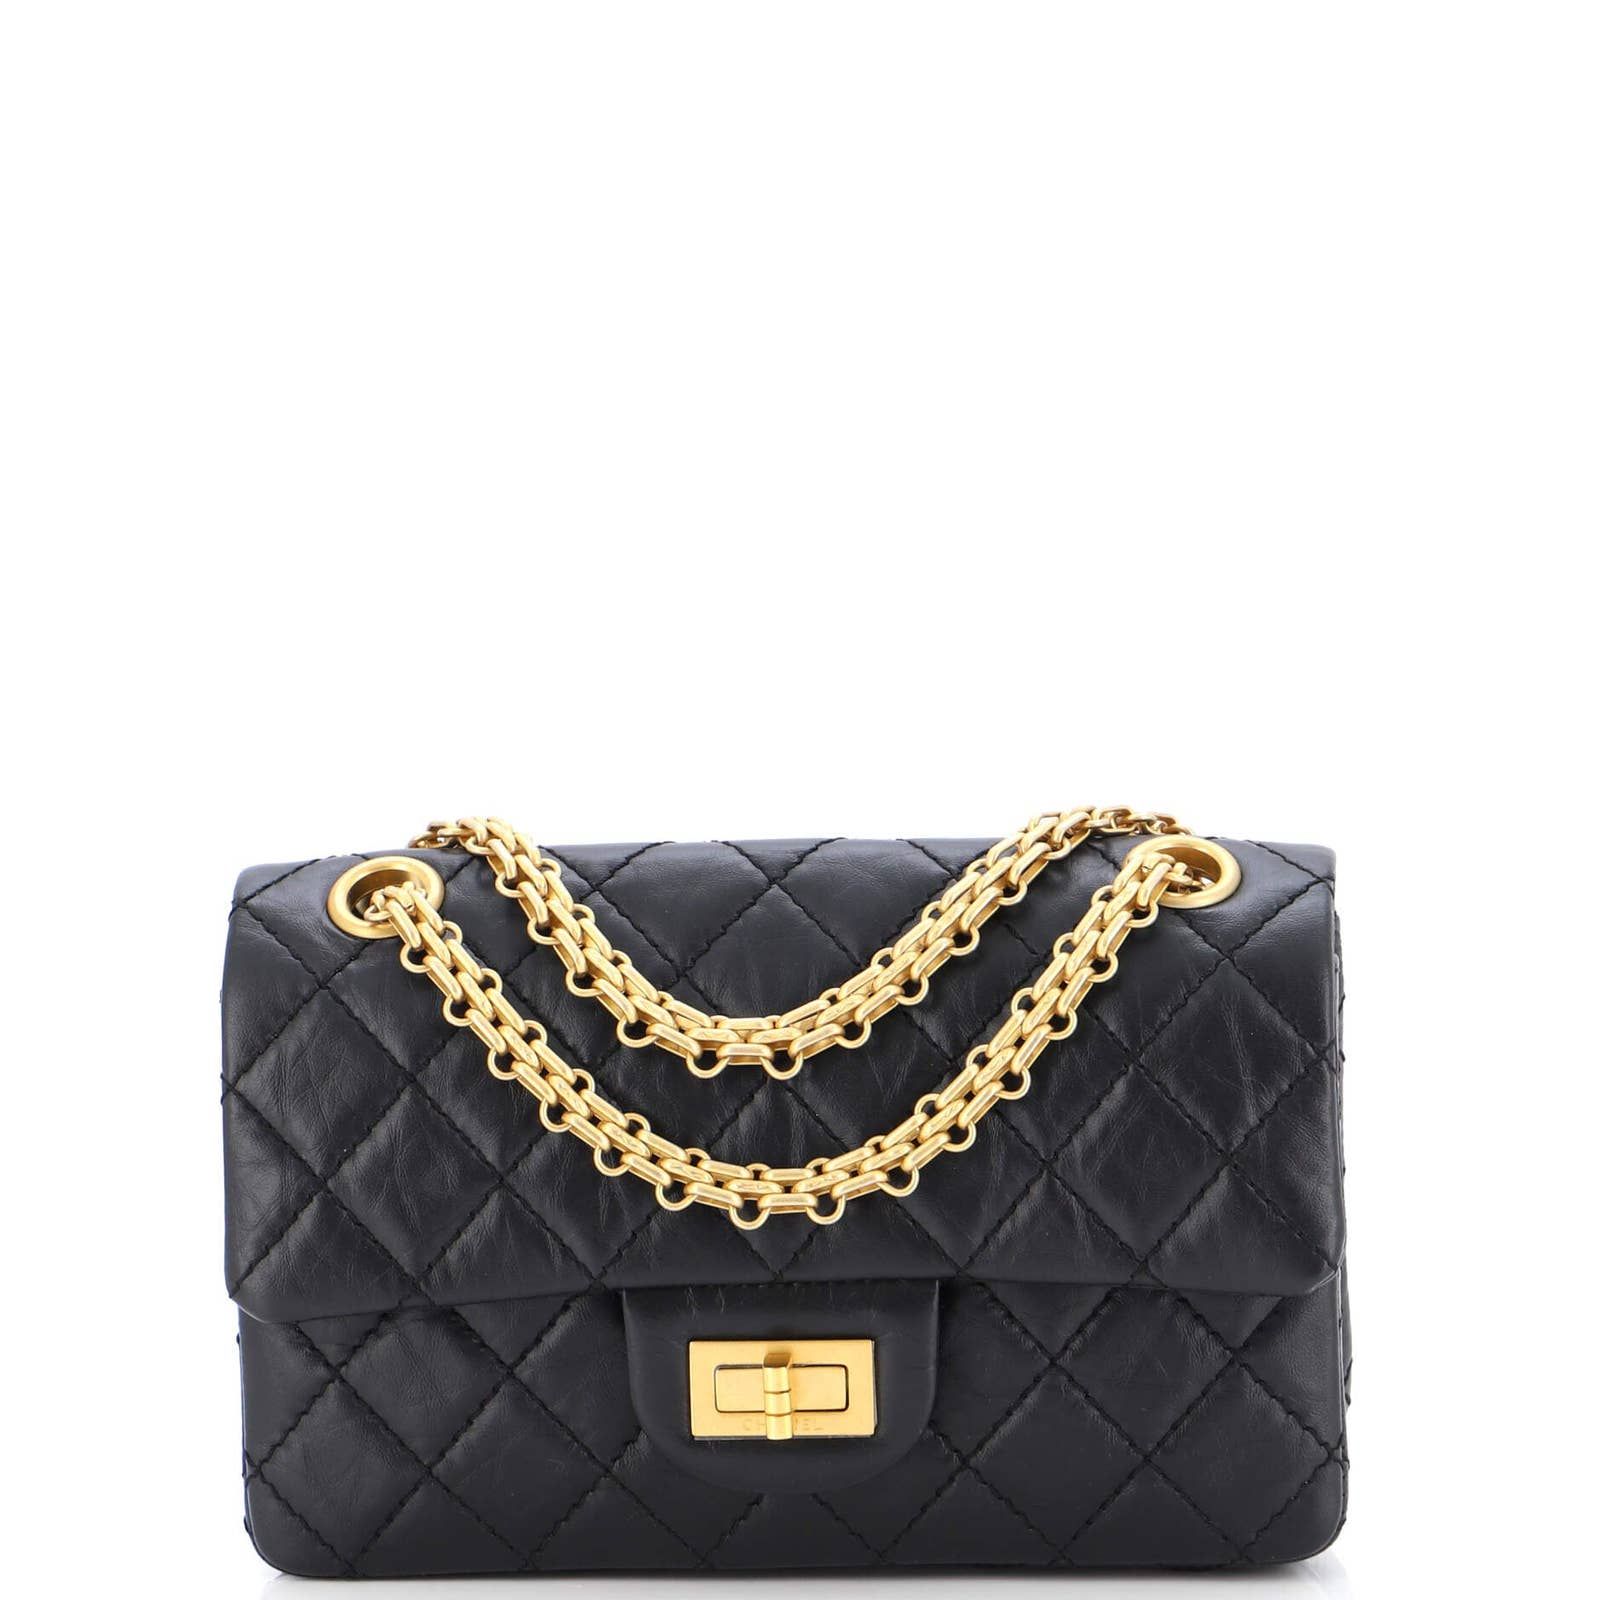 Chanel Reissue 2.55 Flap Bag Quilted Aged Calfskin Mini